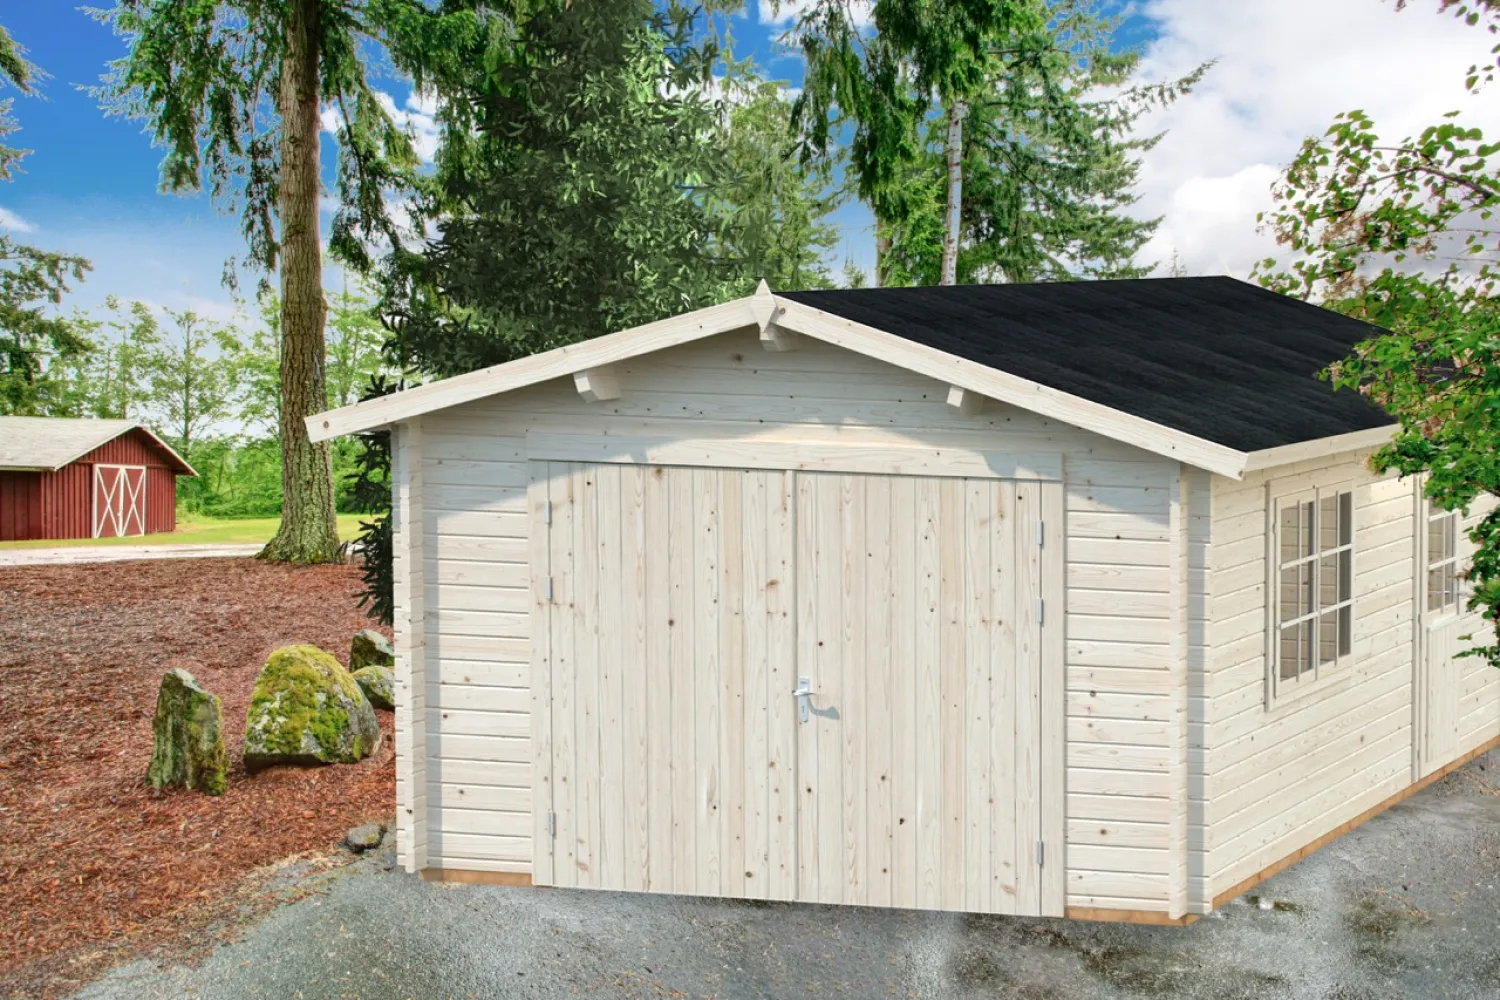 WDPX|gro-1_palmako_garage_roger_190_m2_with_wooden_gate_natural_wb.jpg